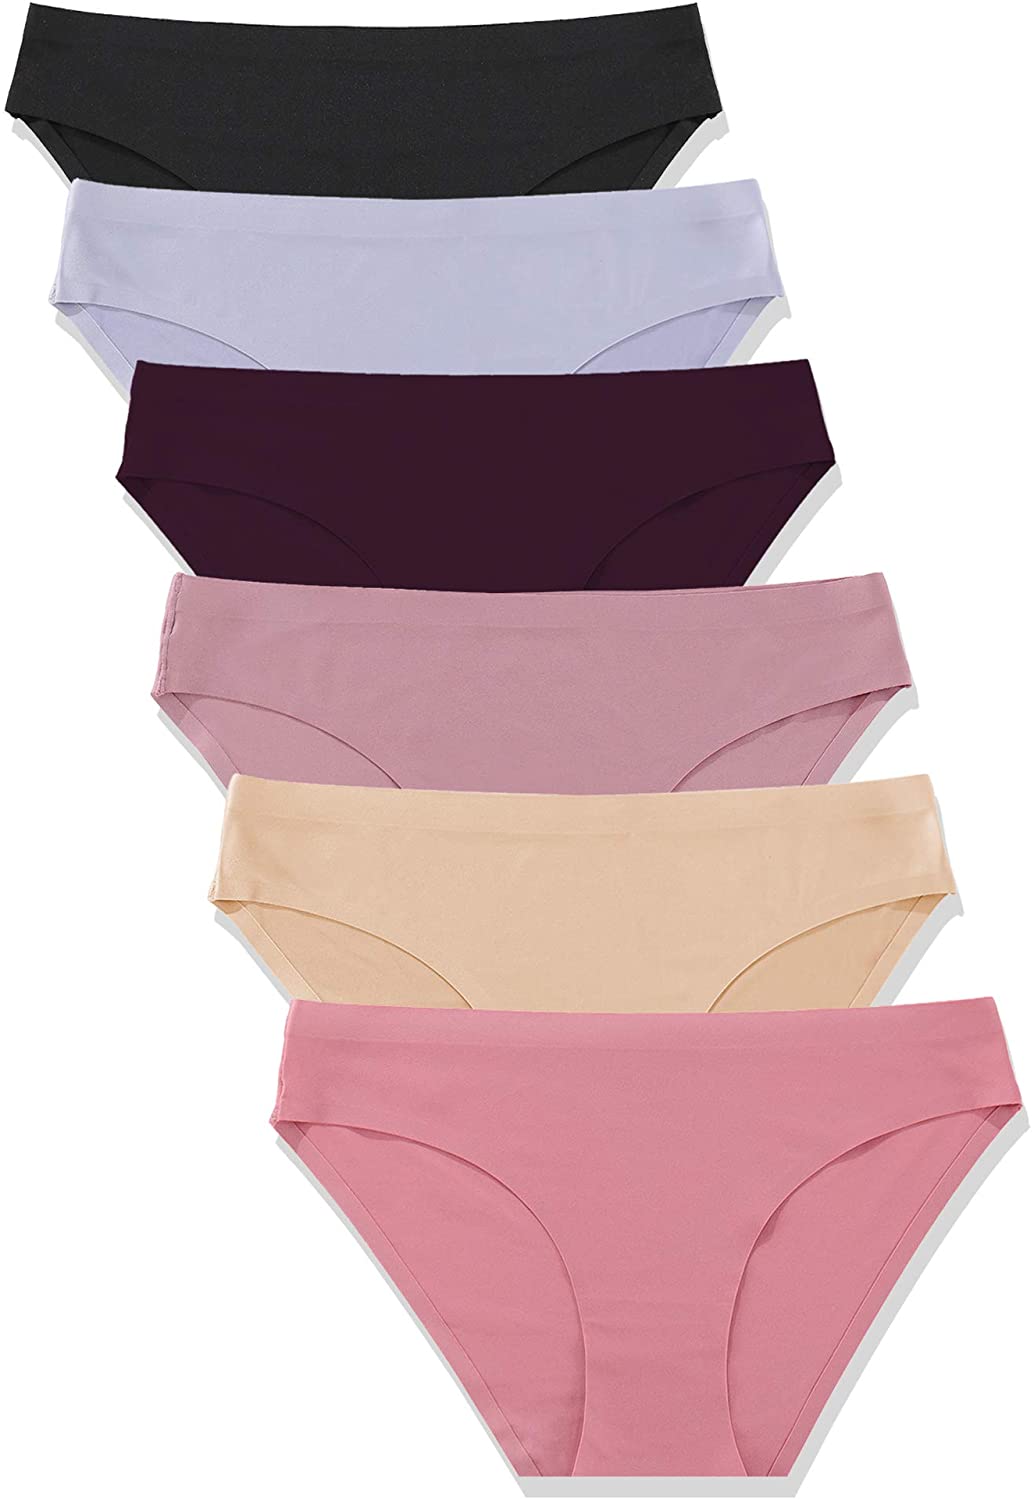 MANISU STORE Lace underwear for women, seamless panties, silk bikini sexy 5  pack, Assorted Colors (Larger) at  Women's Clothing store